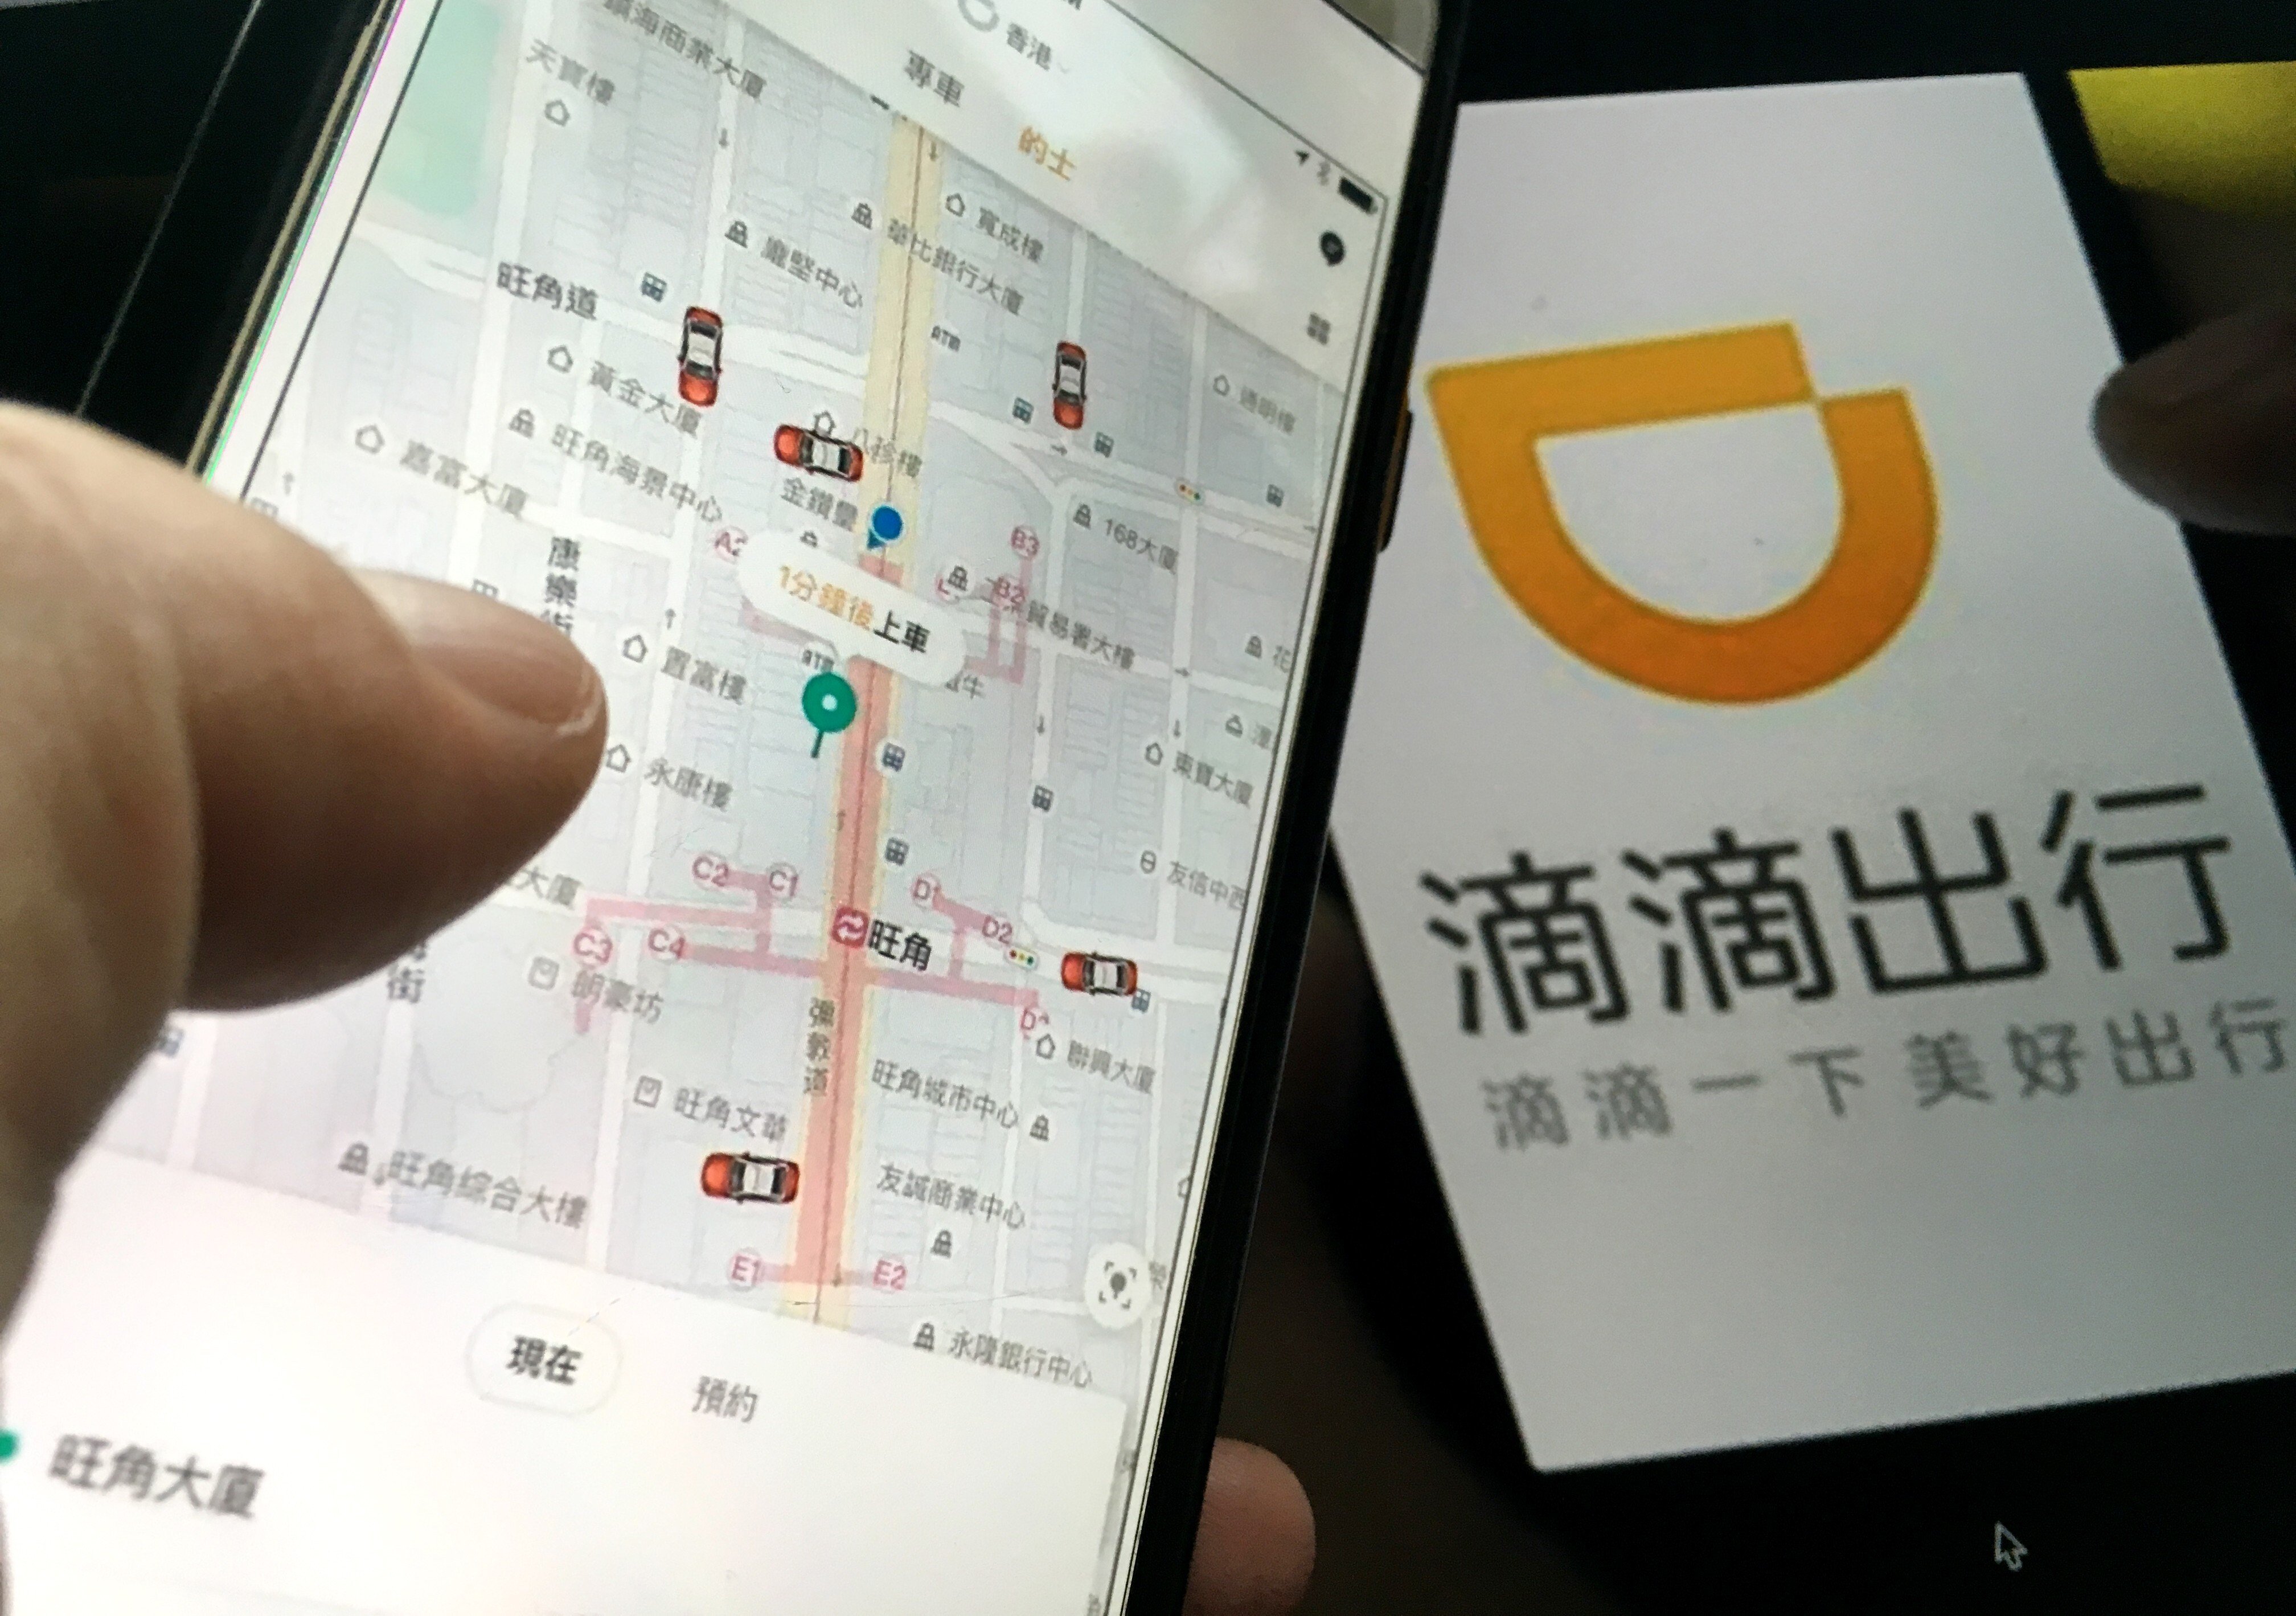 Didi Chuxing’s ride-hailing app is seen displayed on a smartphone. Photo: SCMP